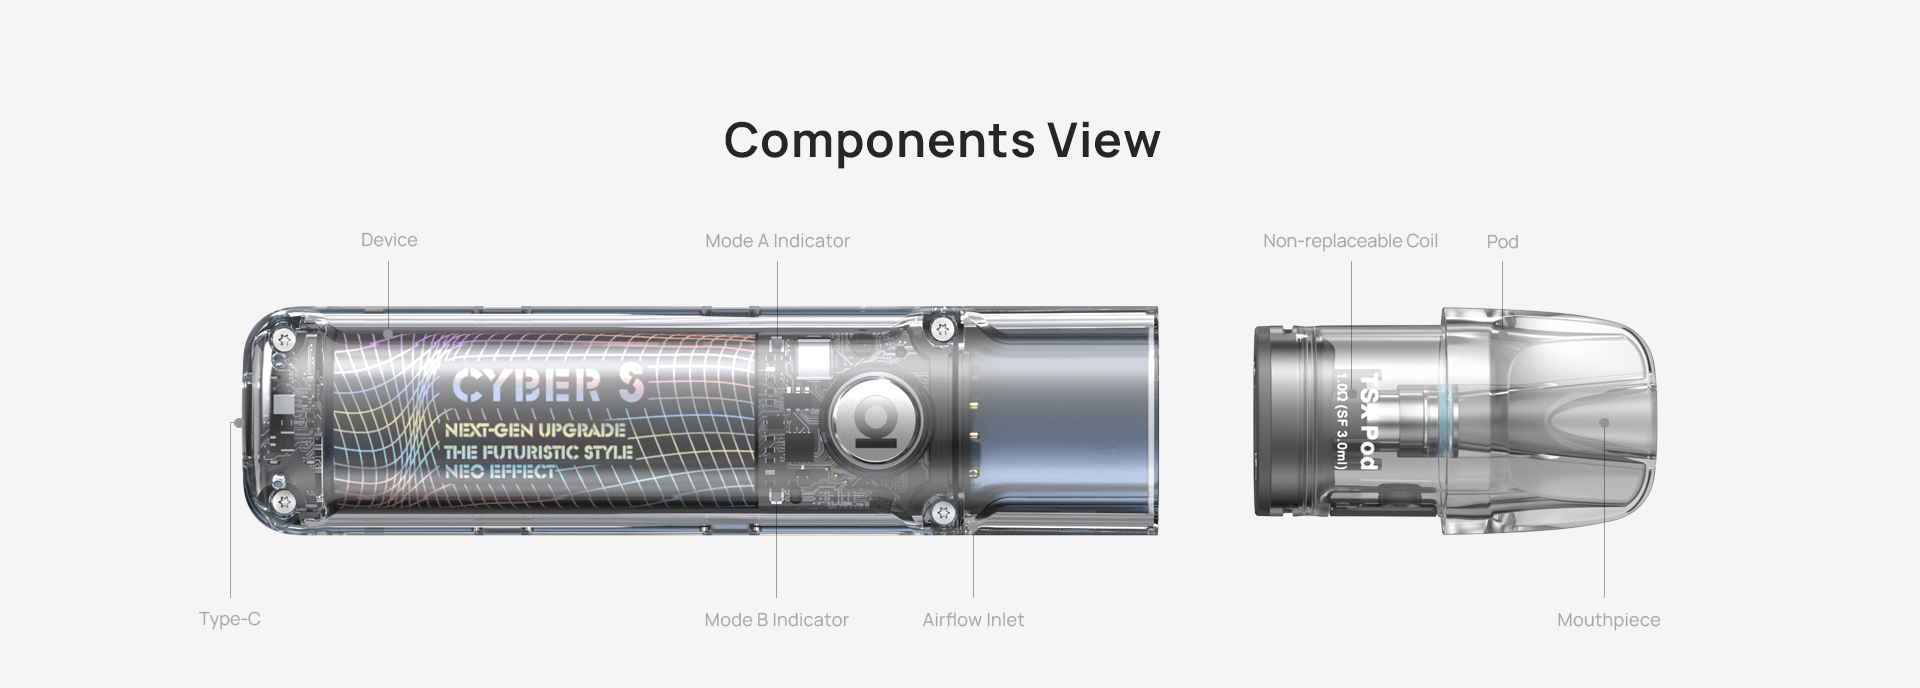 Aspire Cyber S | Components View